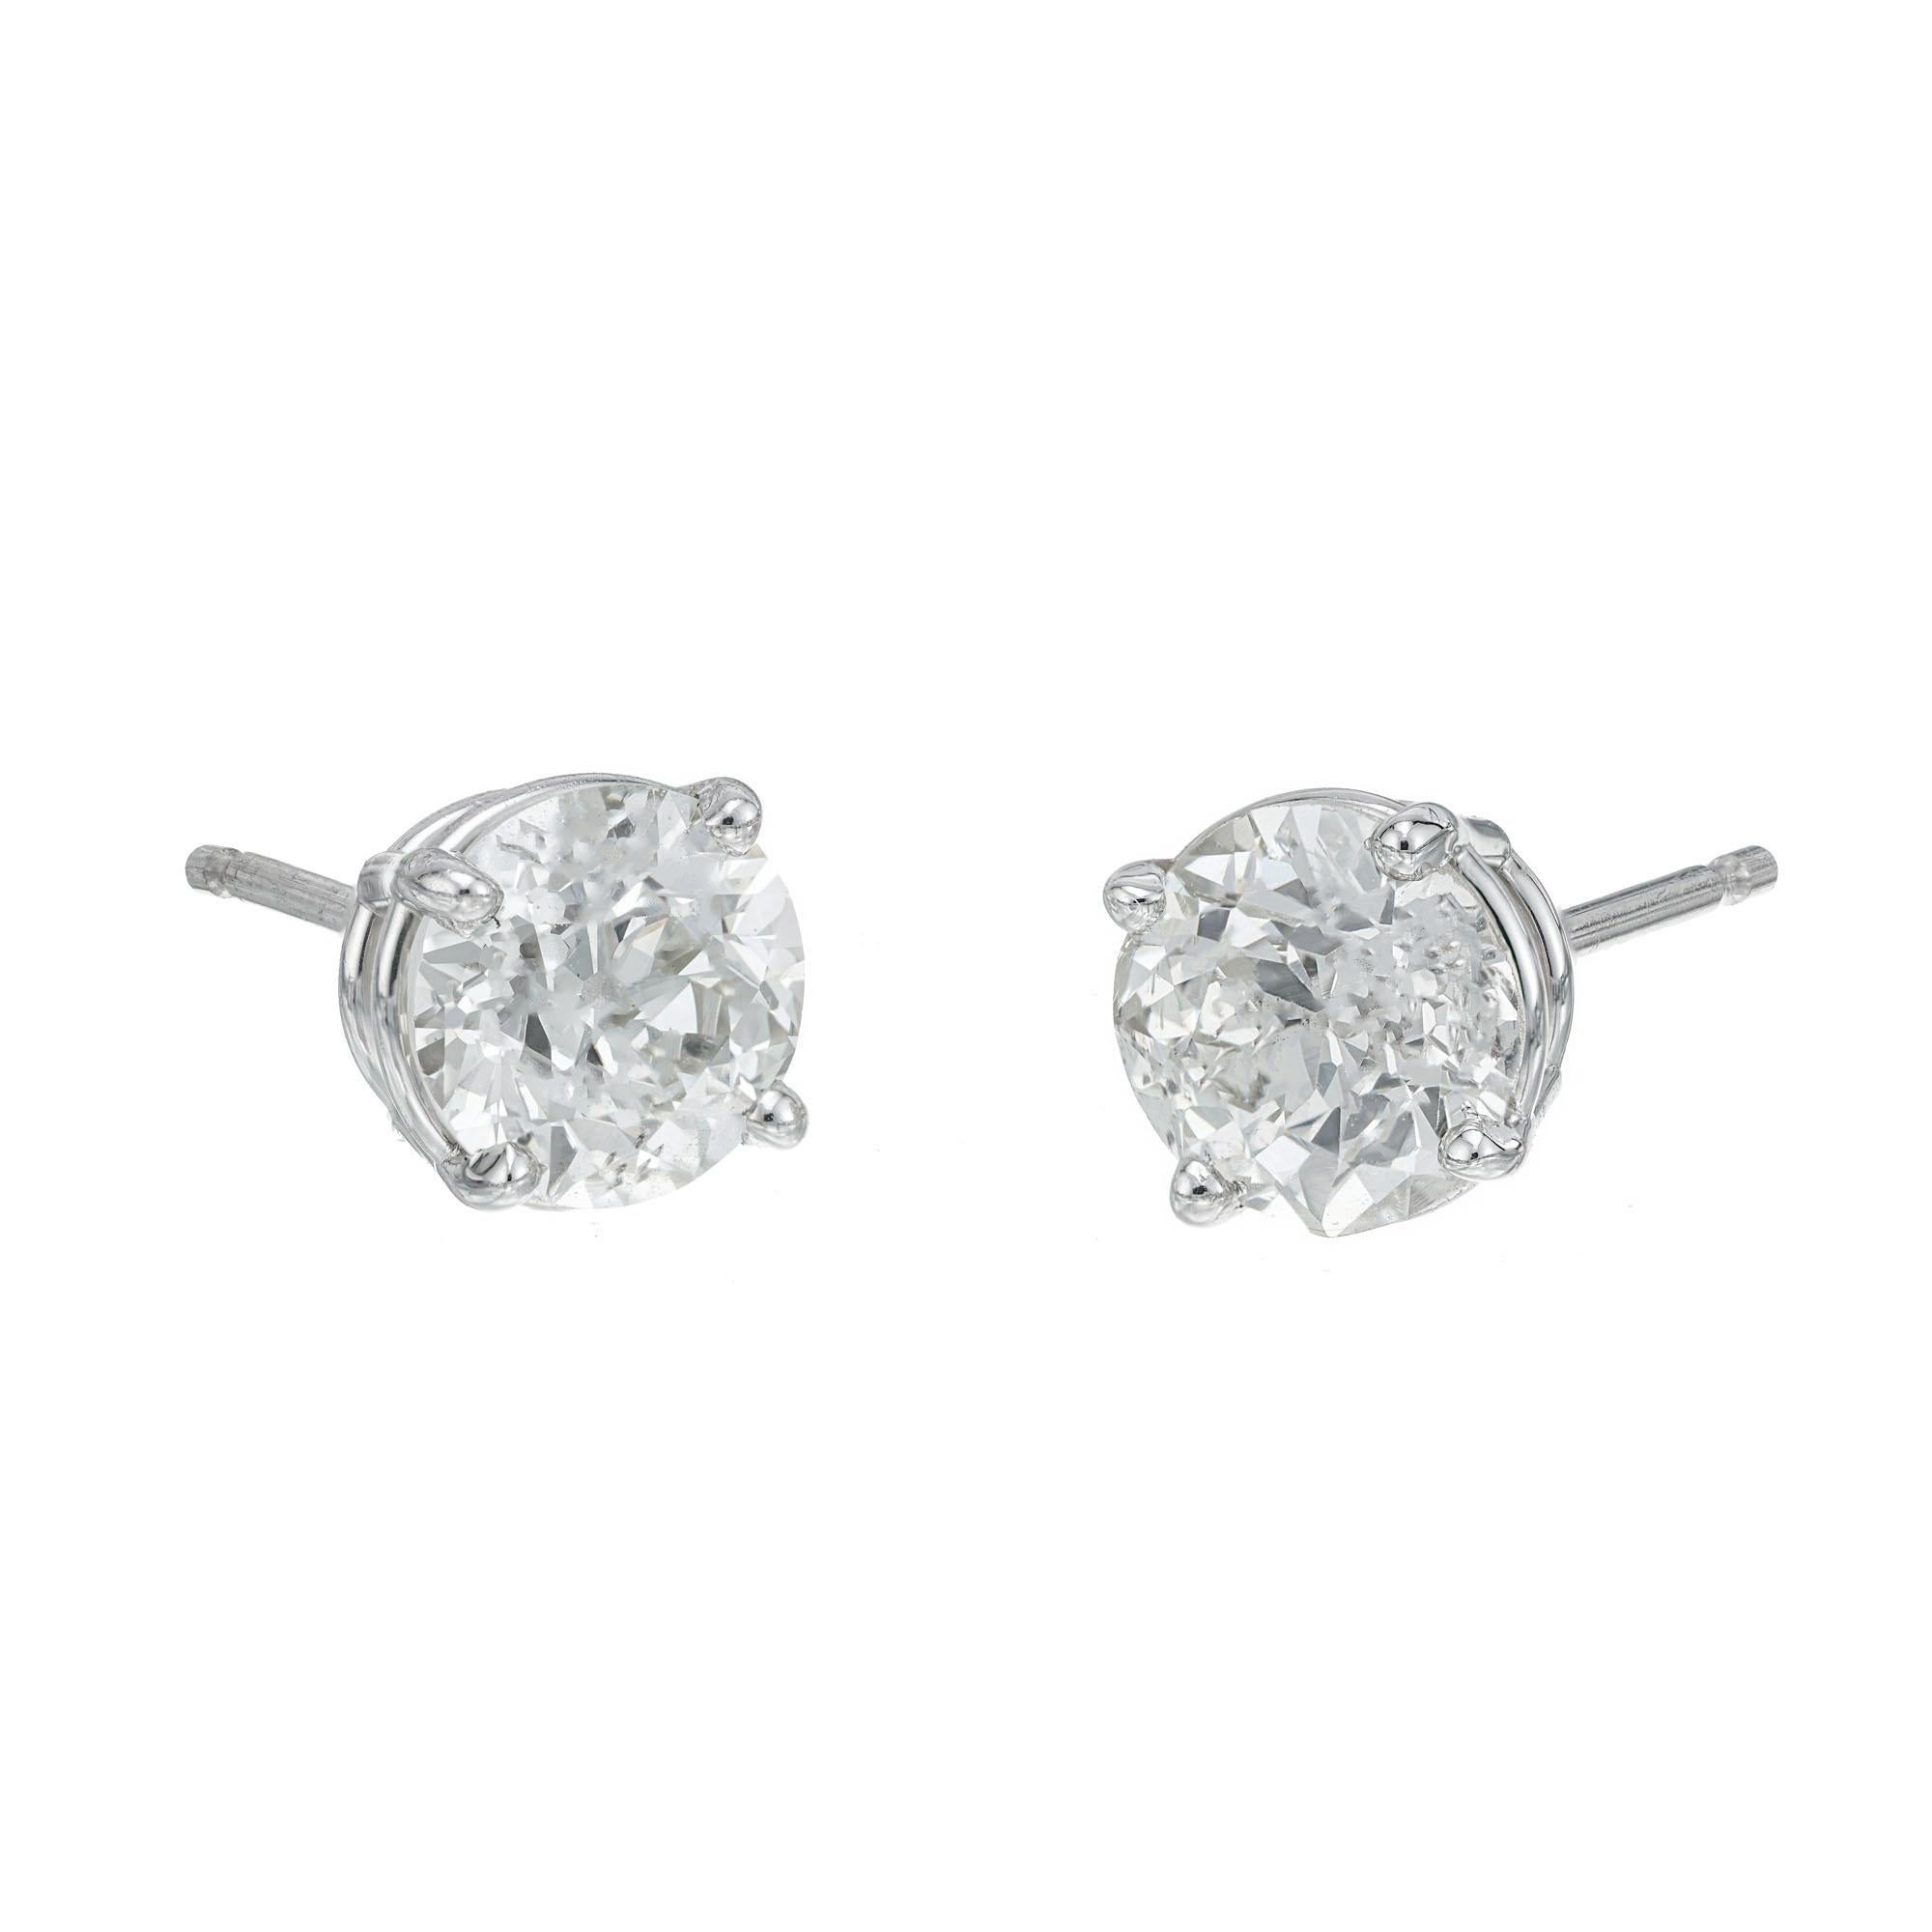 EGL certified Old European cut diamonds circa 1900 in new platinum basket earring settings. Designed and crafted in the Peter Suchy Workshop

1 Old European cut diamonds, J-K I approx. .95cts EGL Certificate # 400148924D
1 Old European cut diamond,